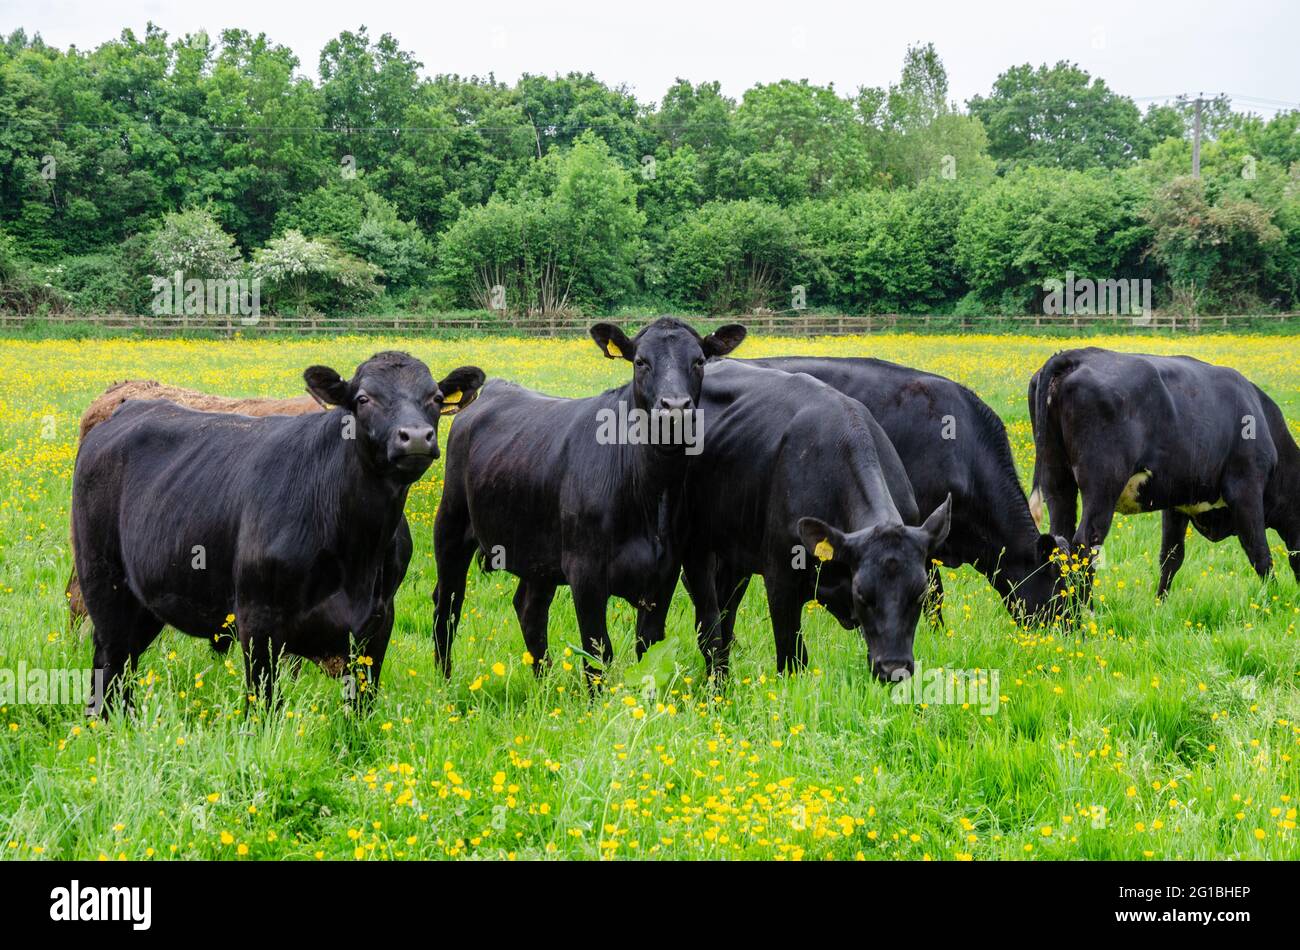 Cows grazing in a field on a farm. Stock Photo